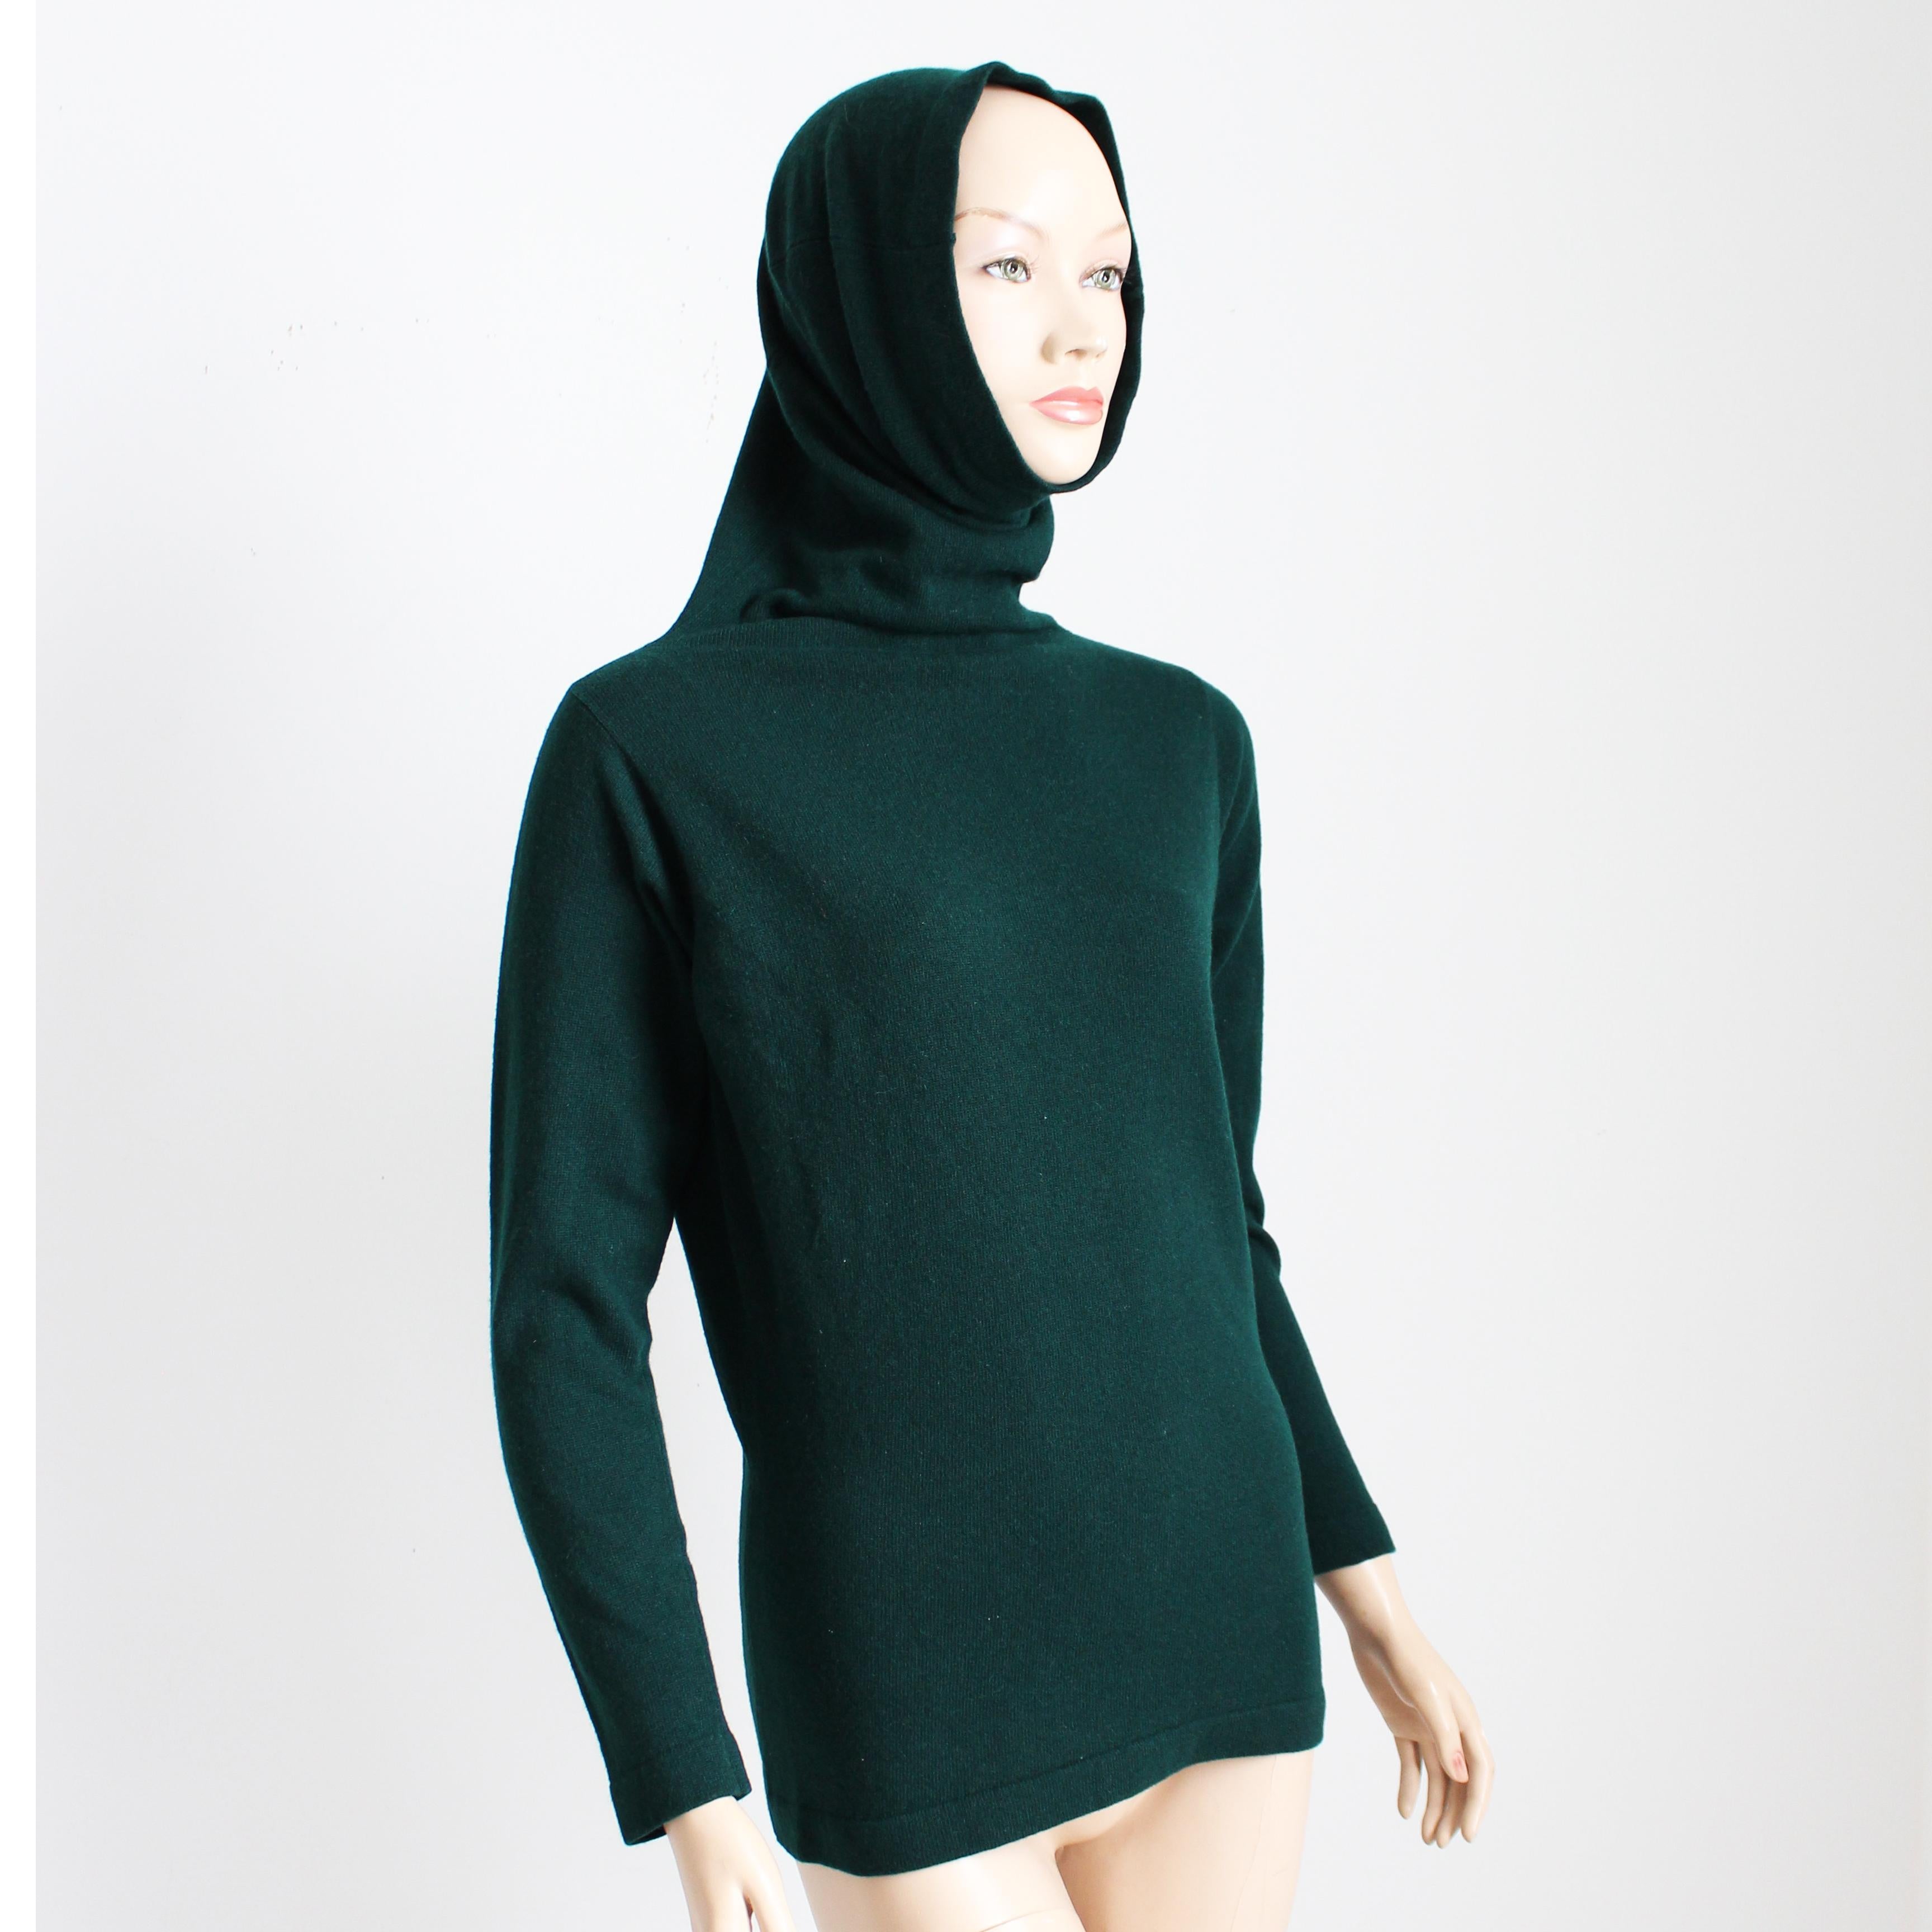 This fabulous sweater was designed by Bonnie Cashin for Saks Fifth Avenue, most likely in the 70s.  Made from a rich forest green cashmere knit, it features Bonnie's wonderful funnel neck, which can be worn on the neck or pulled up over the head for